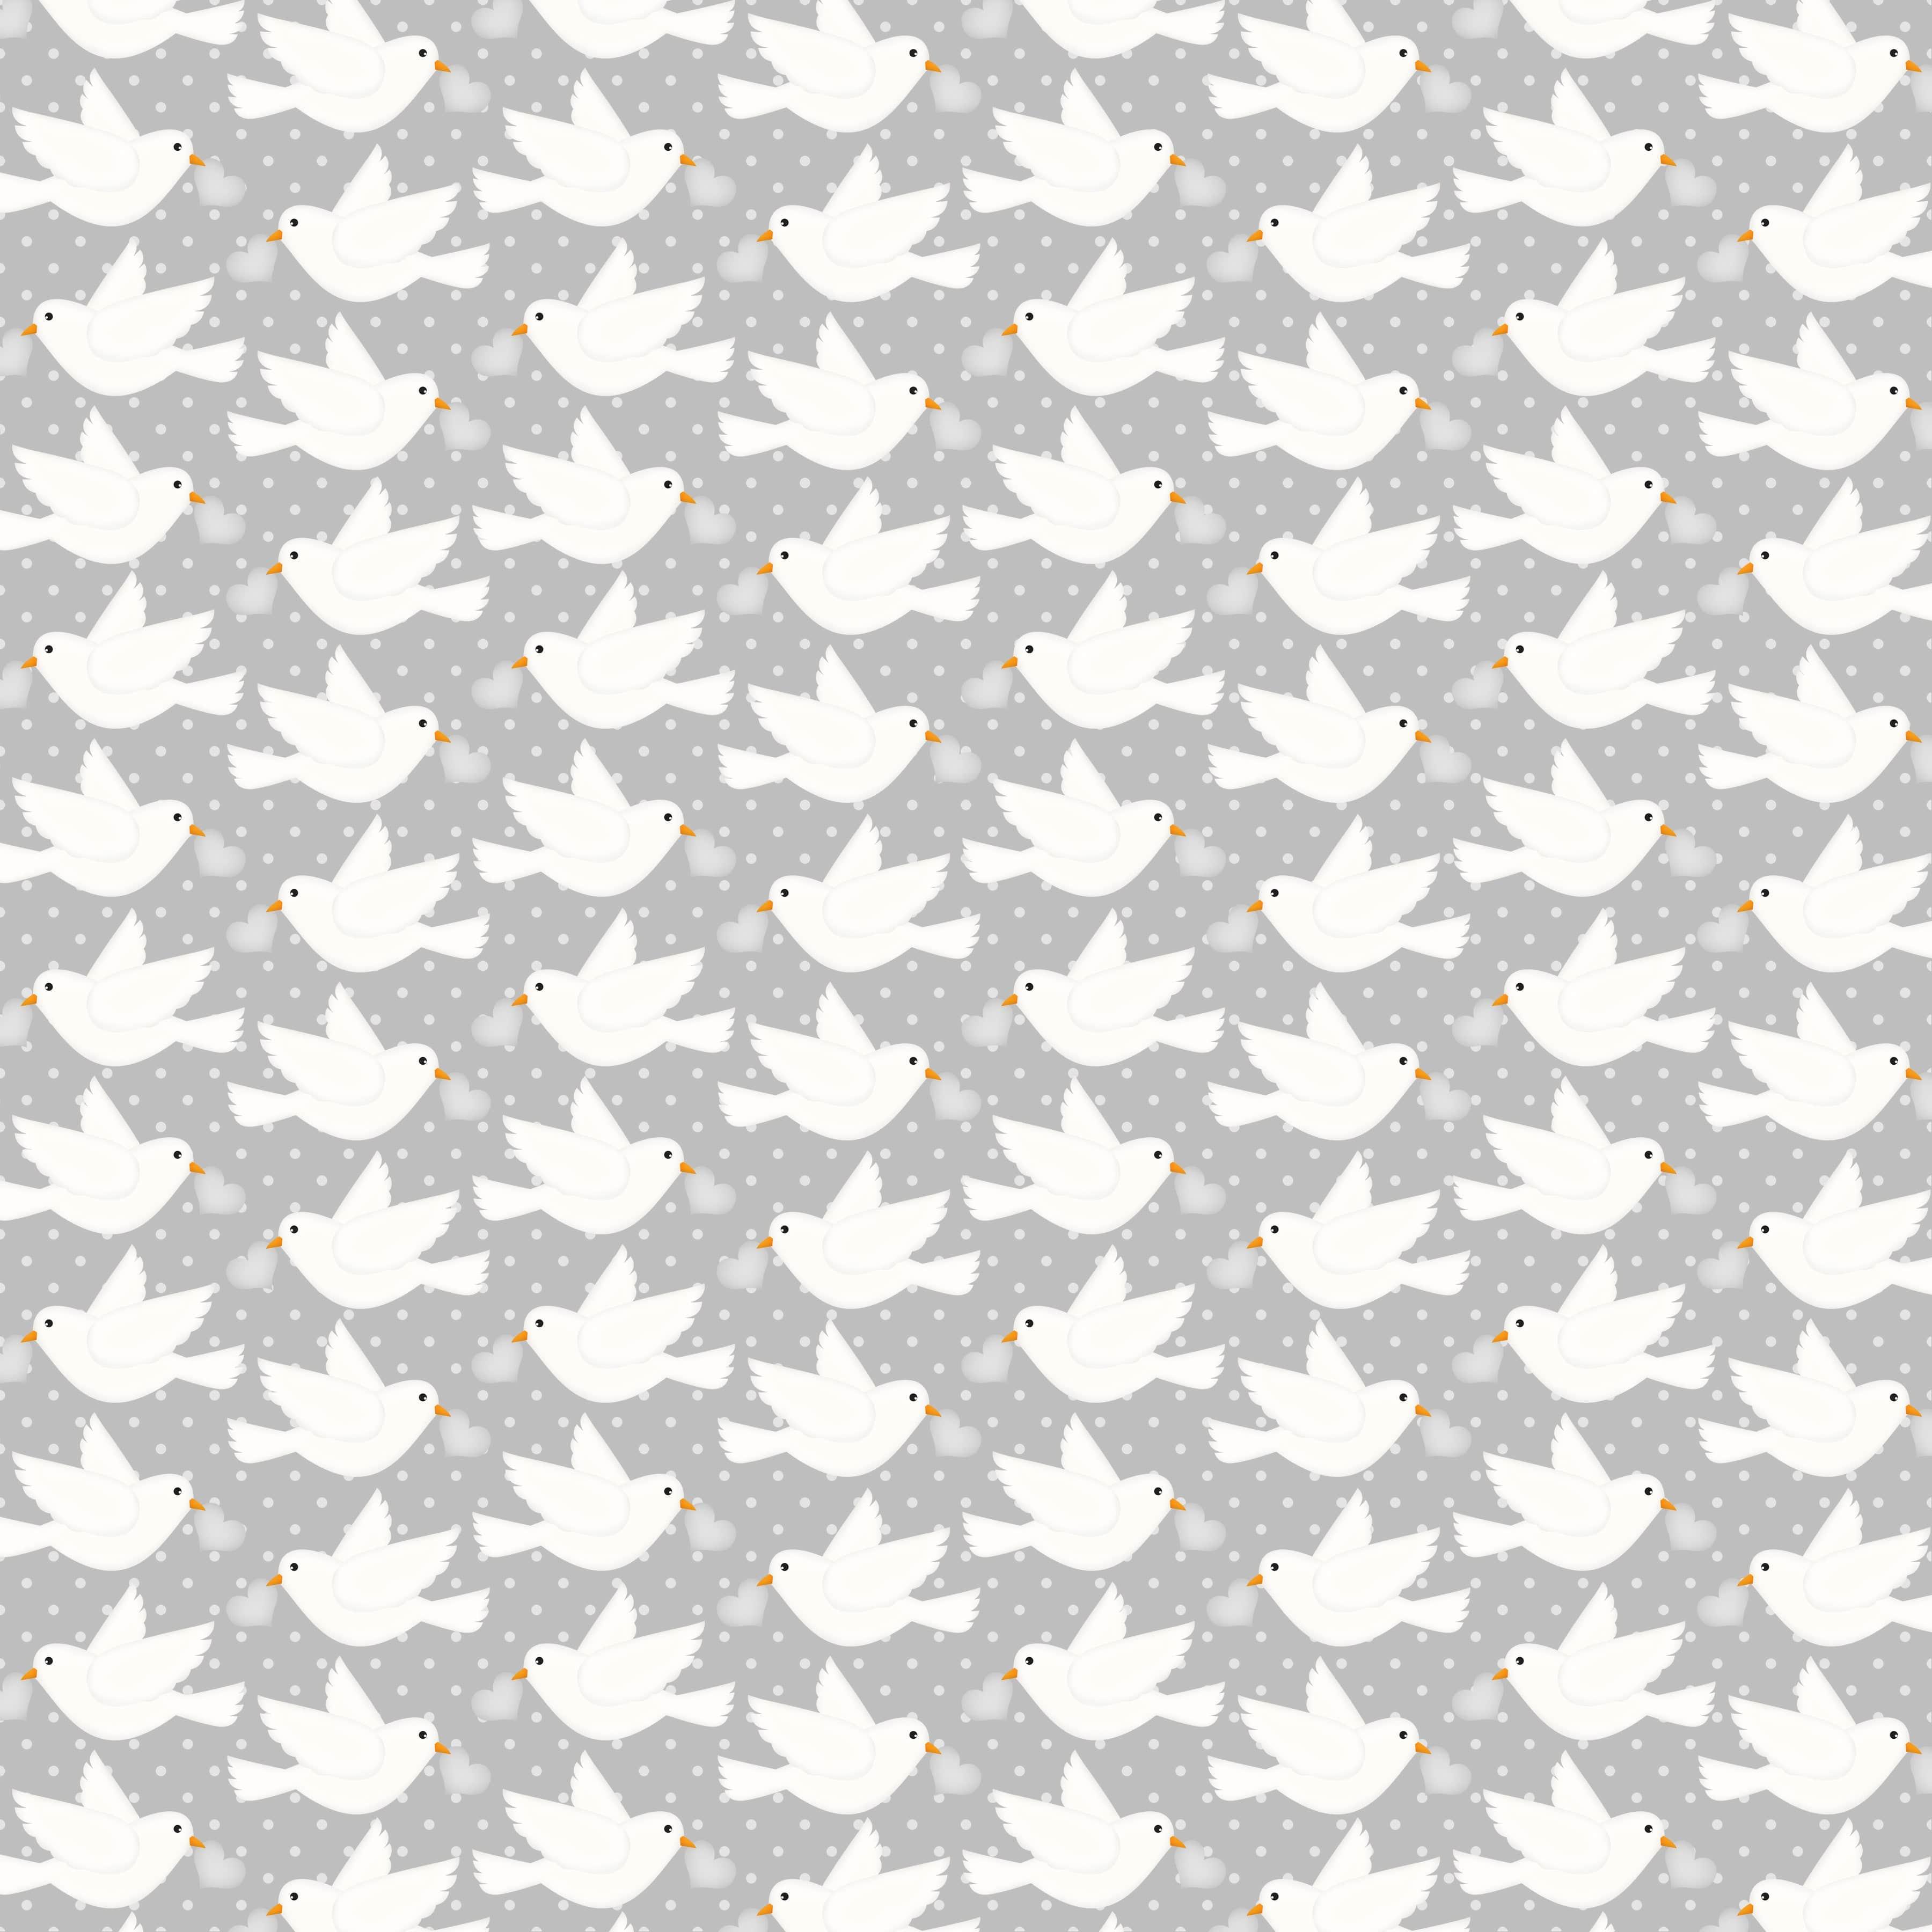 Lasting Love Collection White Doves 12 x 12 Double-Sided Scrapbook Paper by SSC Designs - Scrapbook Supply Companies